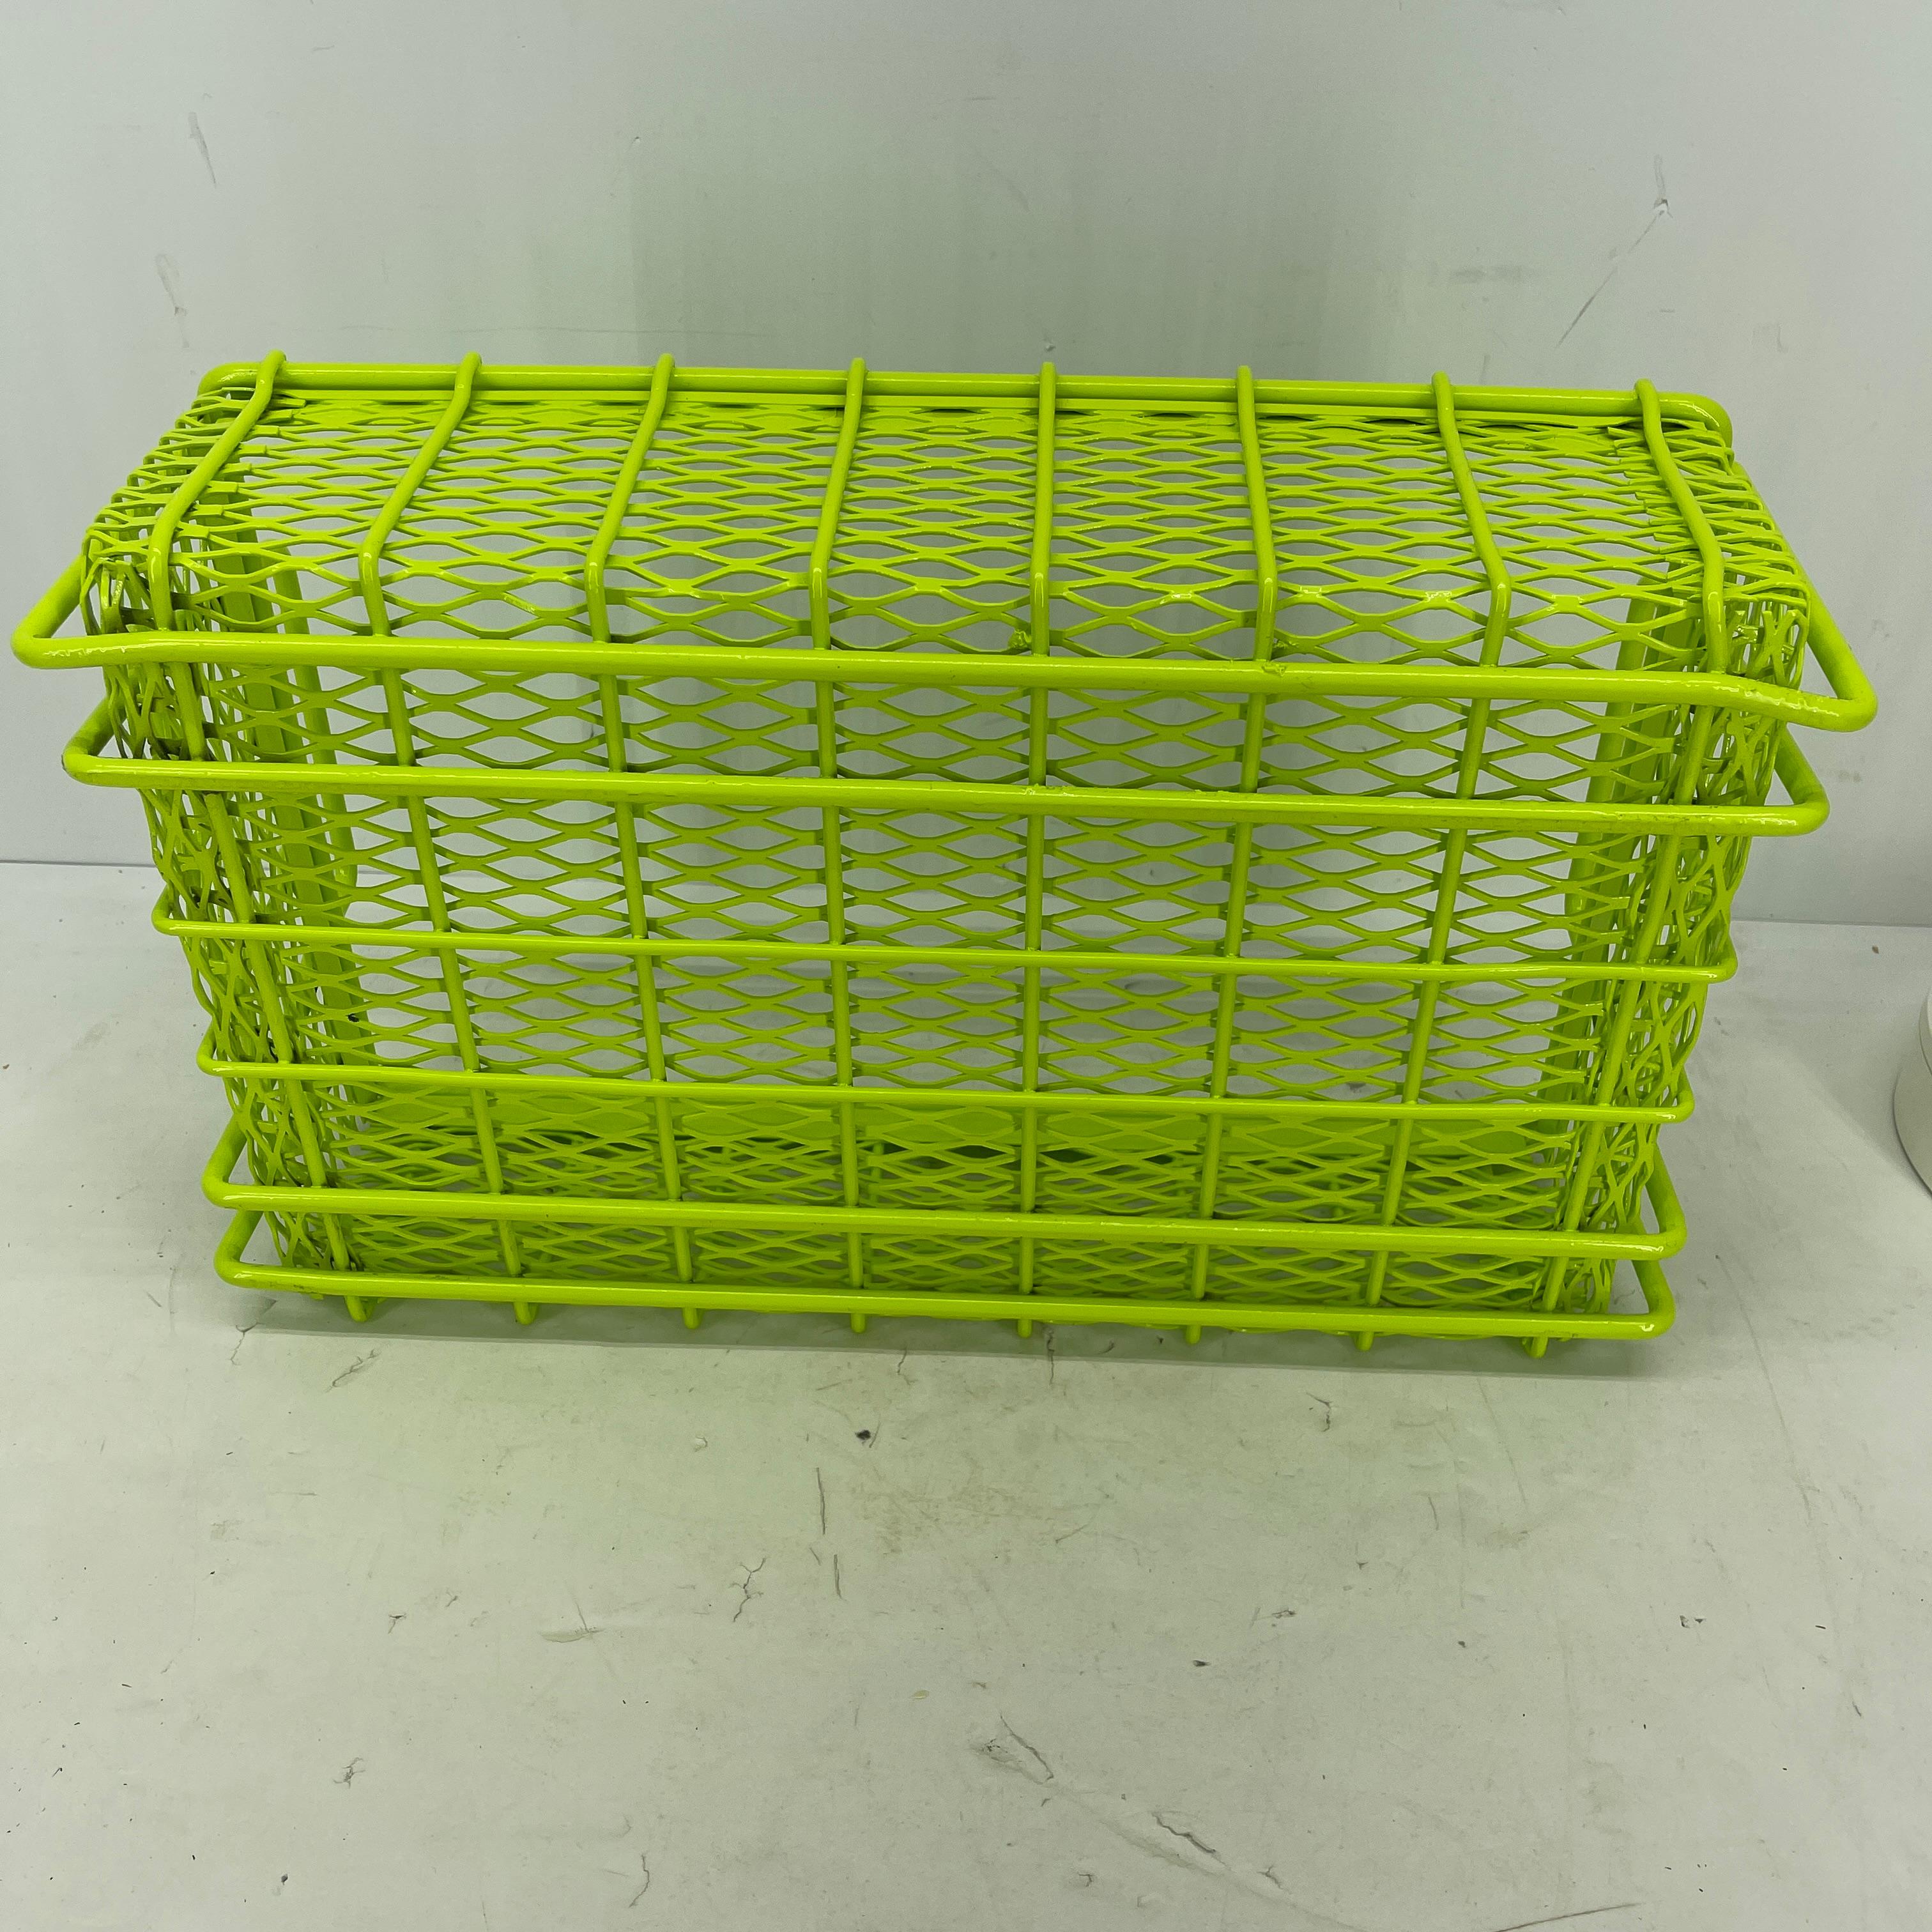 Industrial Era Metal Storage Bins, Powder Coated Bright Chartreuse For Sale 4